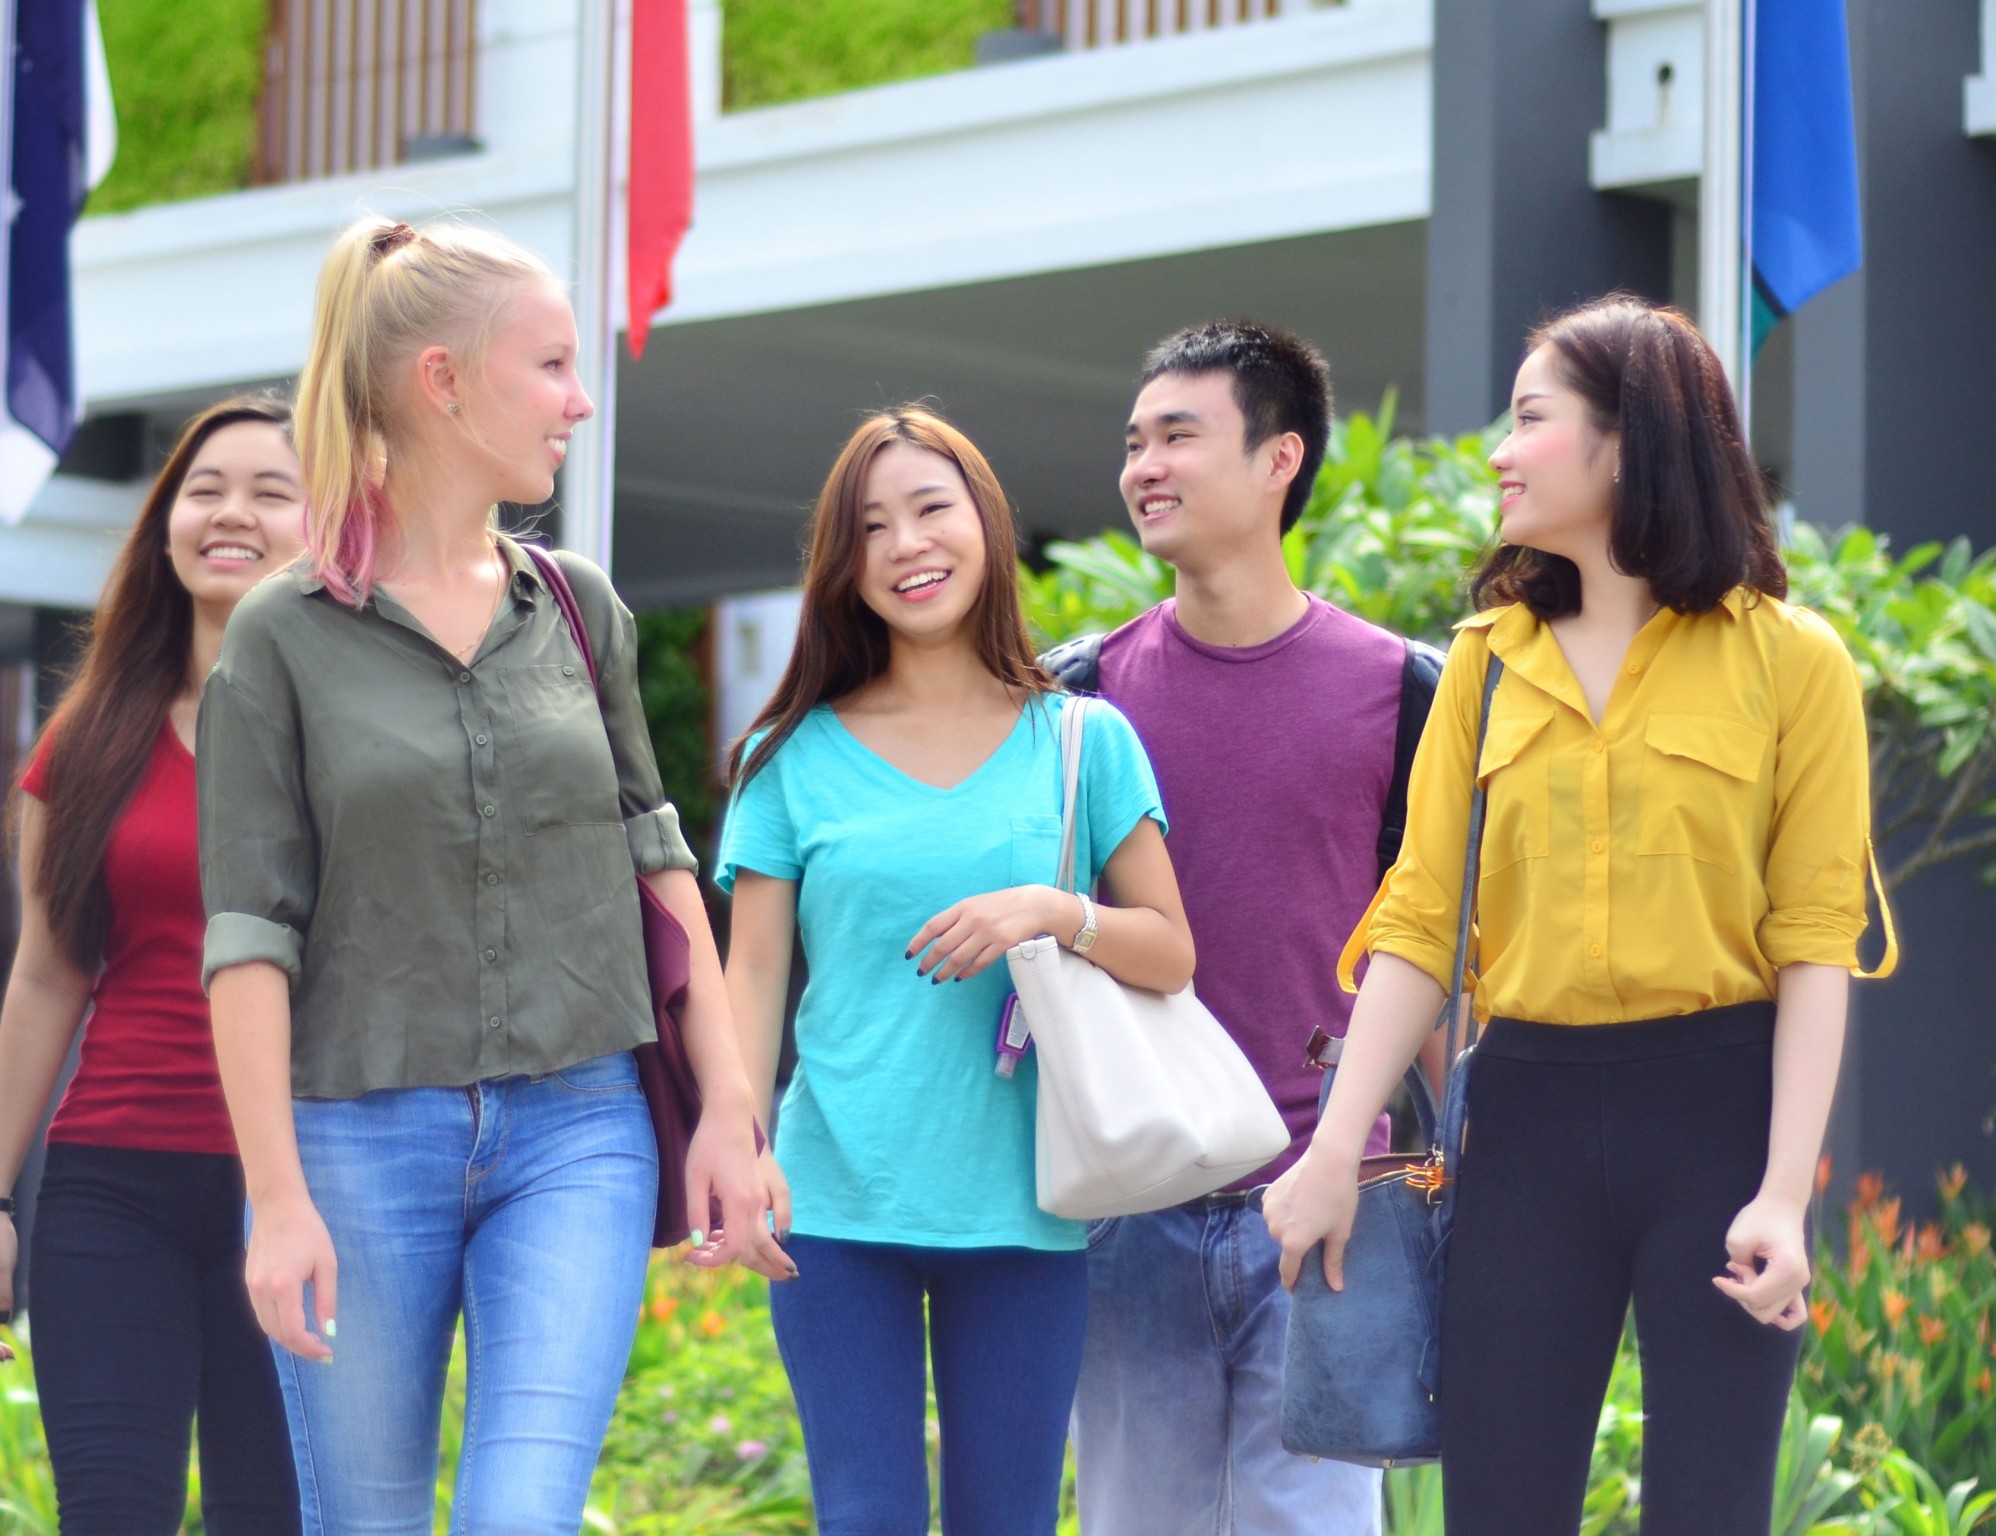 Study in Australia or Singapore? James Cook University’s business degrees let you do both